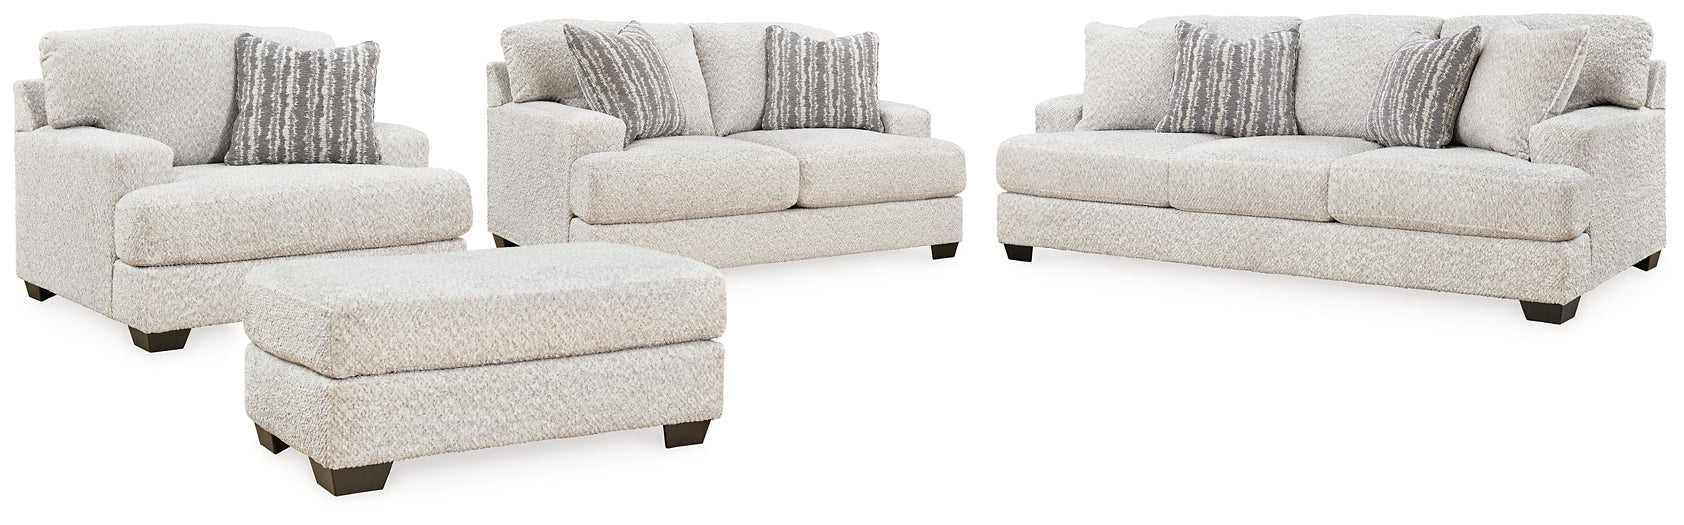 Brebryan Sofa, Loveseat, Chair and Ottoman soft fabric, off white color